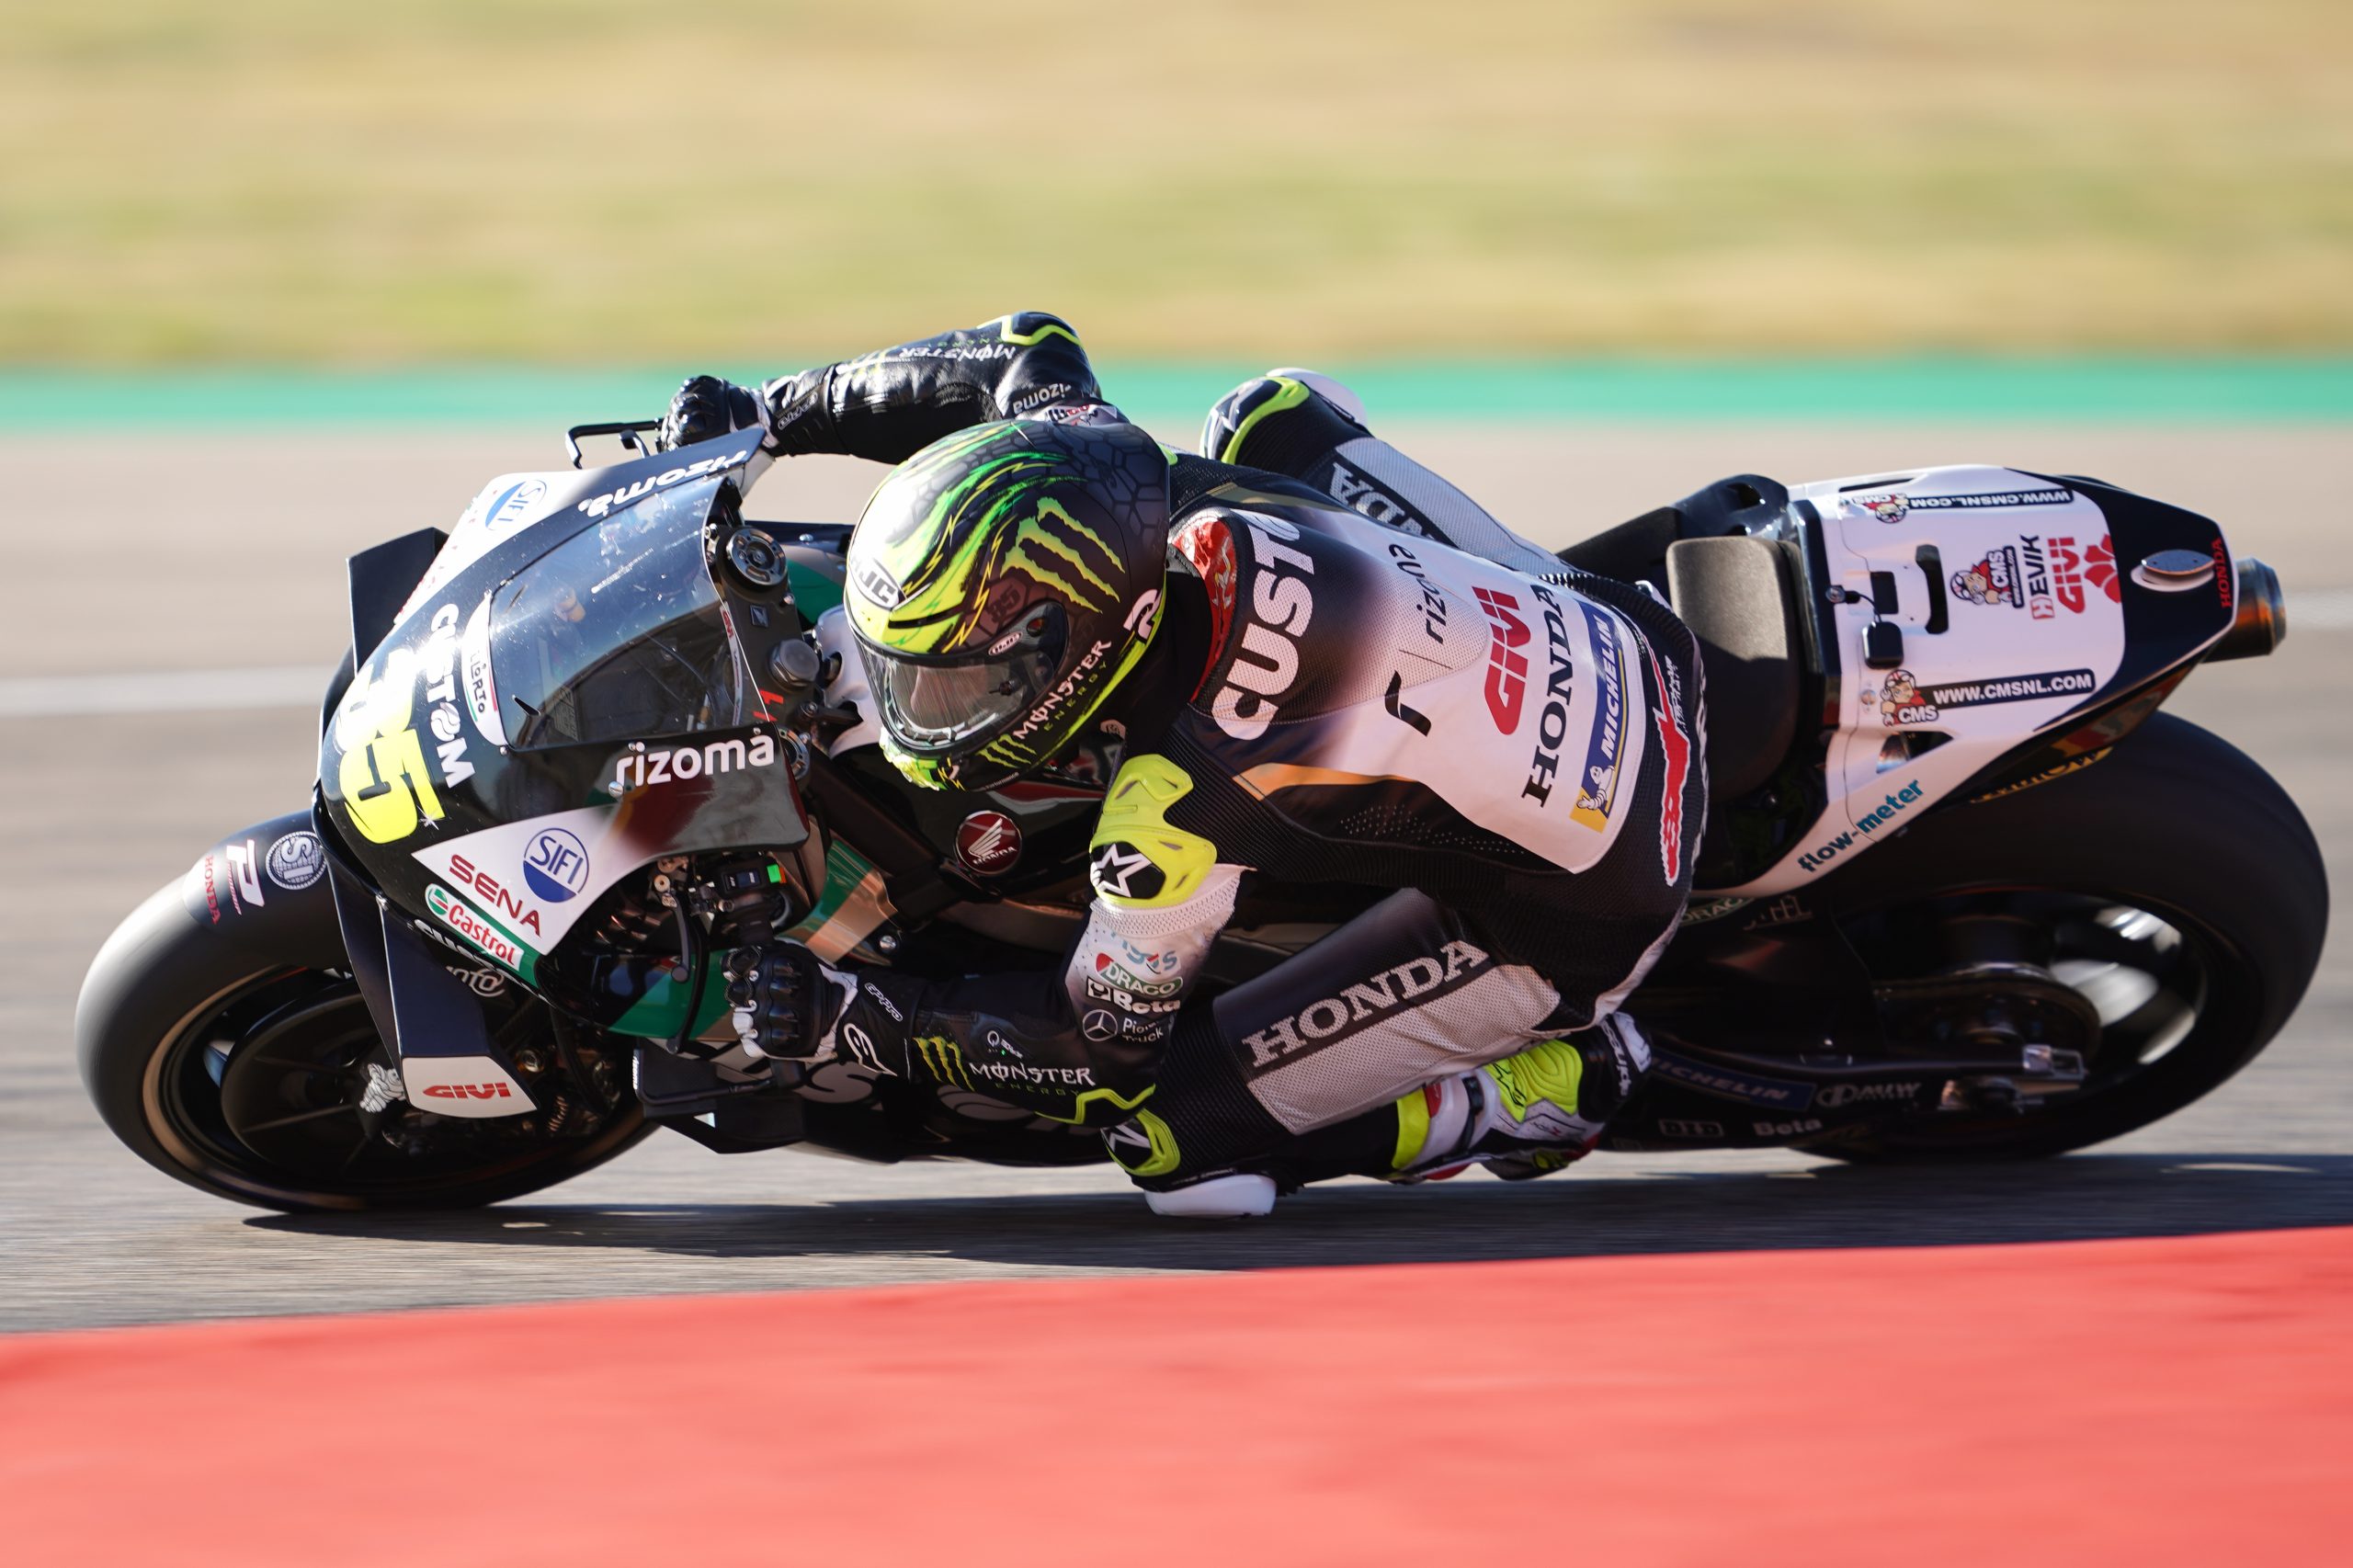 Third row for Crutchlow